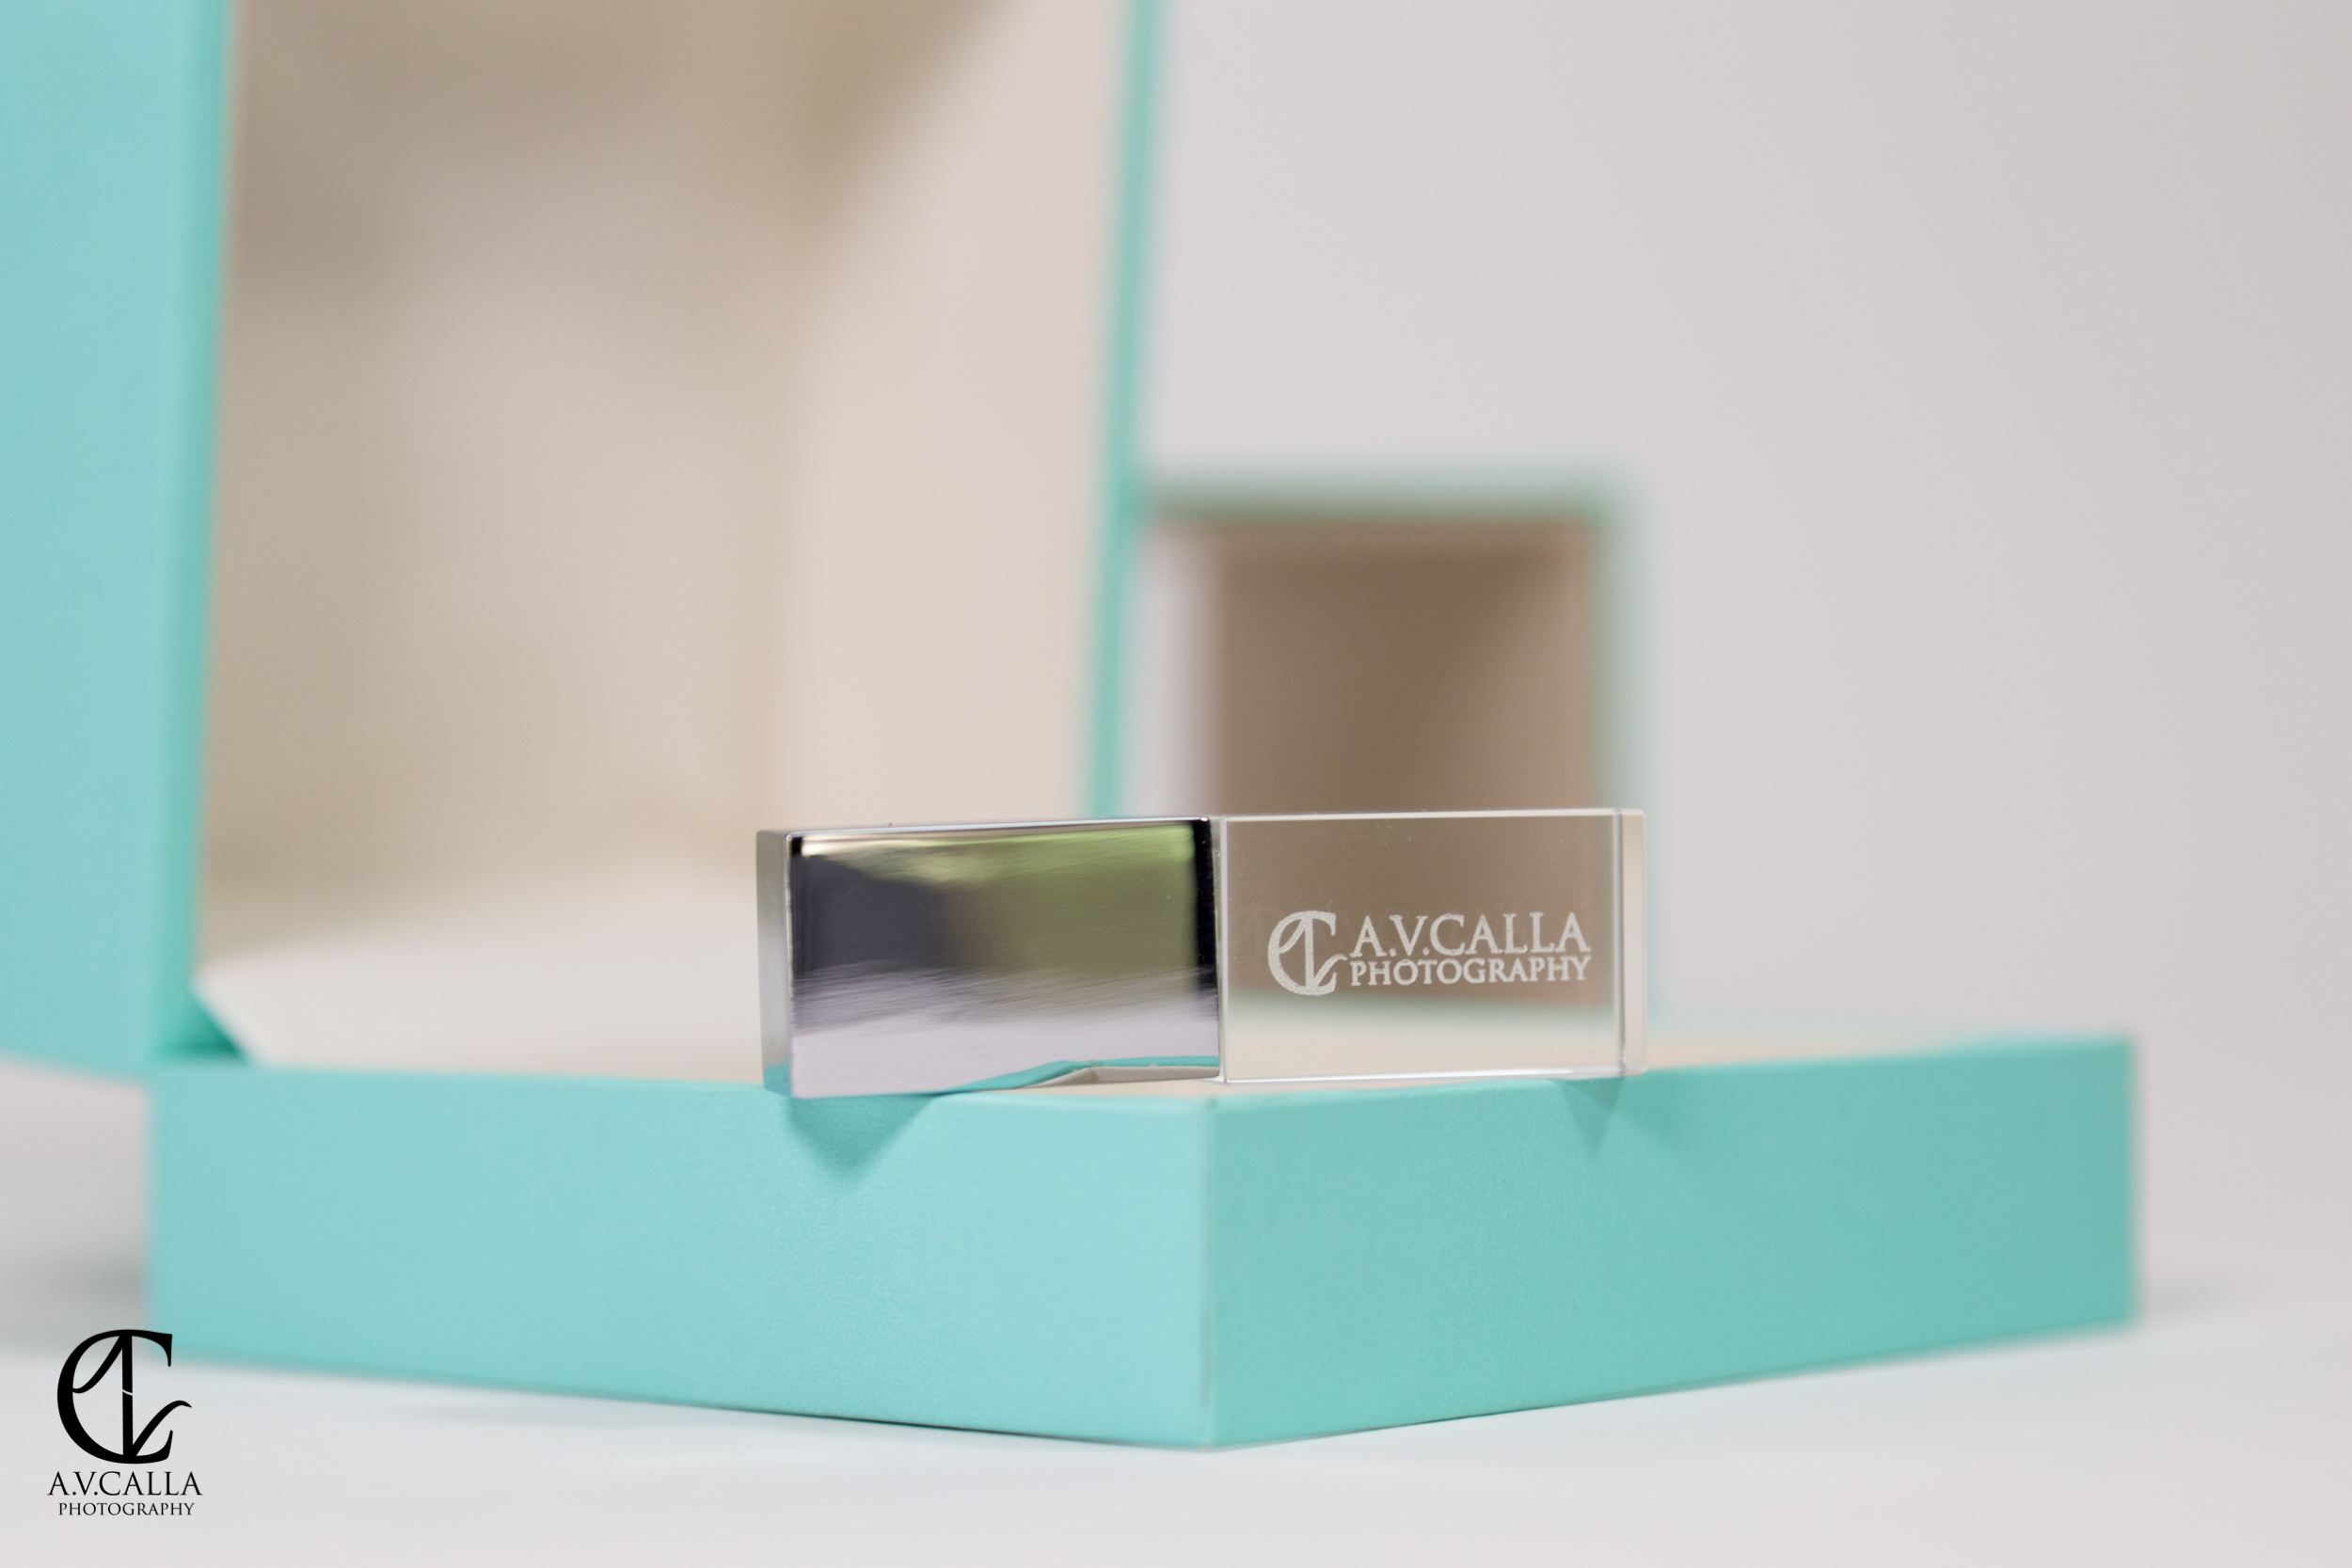  Luxury Crystal USB Drives. Chrome, Gold and other great options. 